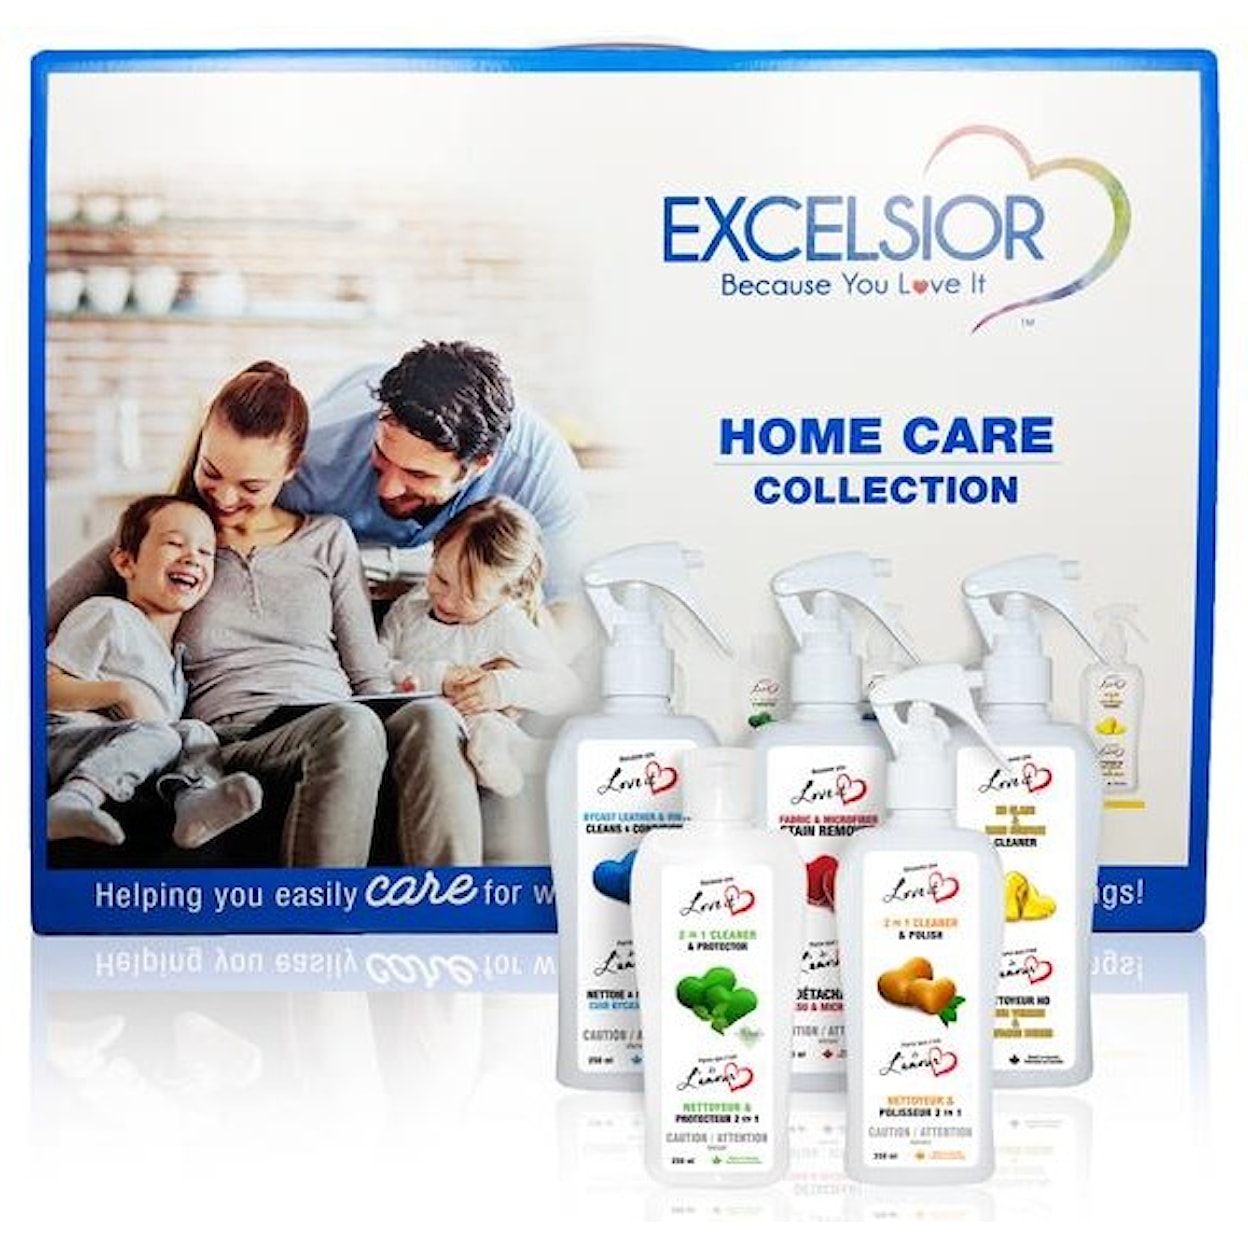 Excelsior Protection Plan Home Care Collection